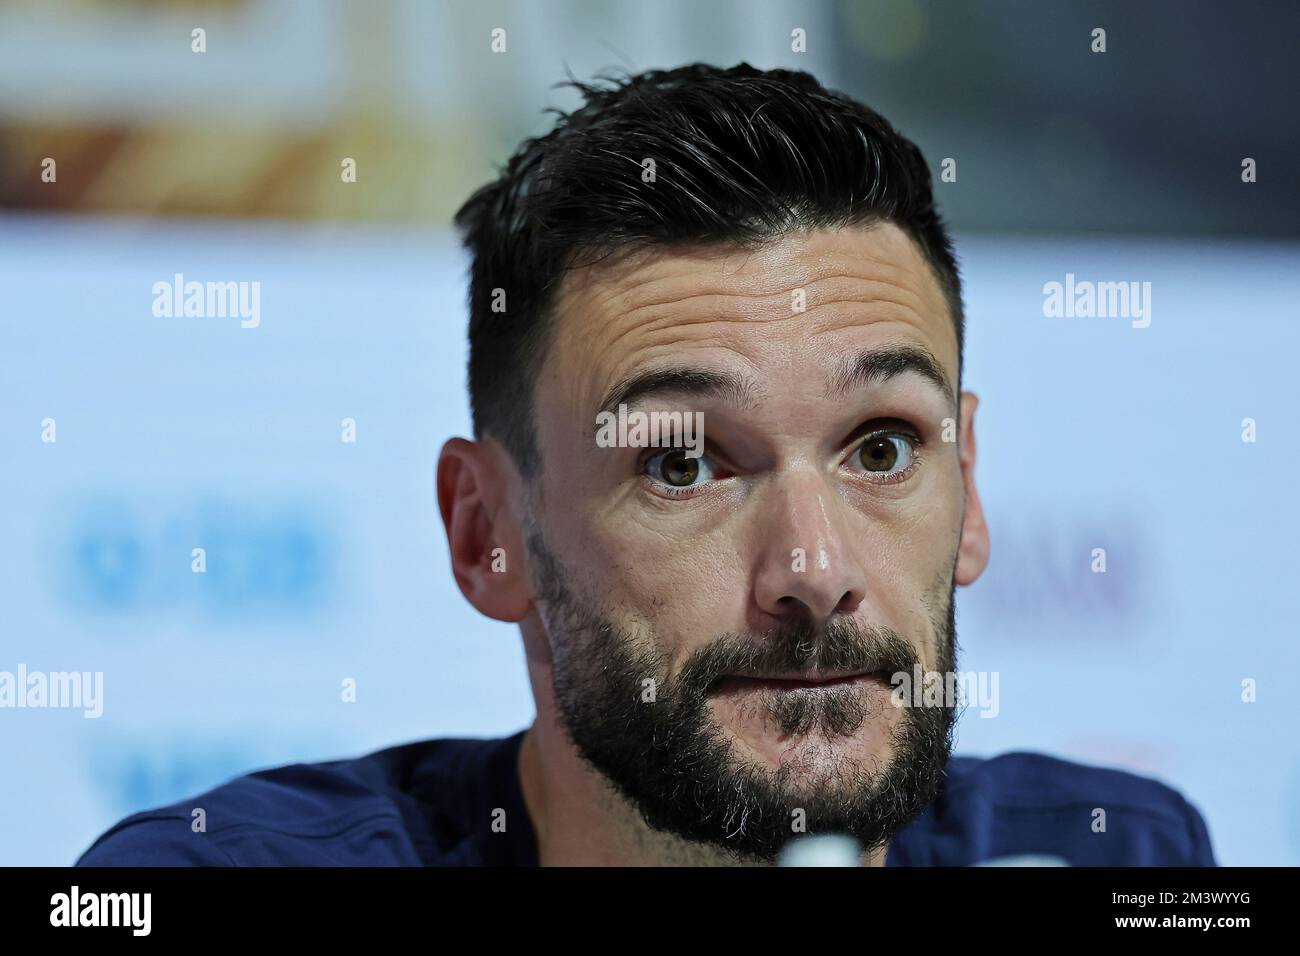 Hugo Lloris of France press conference during the FIFA World Cup Qatar 2022 match at the Media Center on Dec 17, 2022 in Doha Qatar. (Photo by Heuler Andrey / Dia Esportivo / PRESSIN) Stock Photo